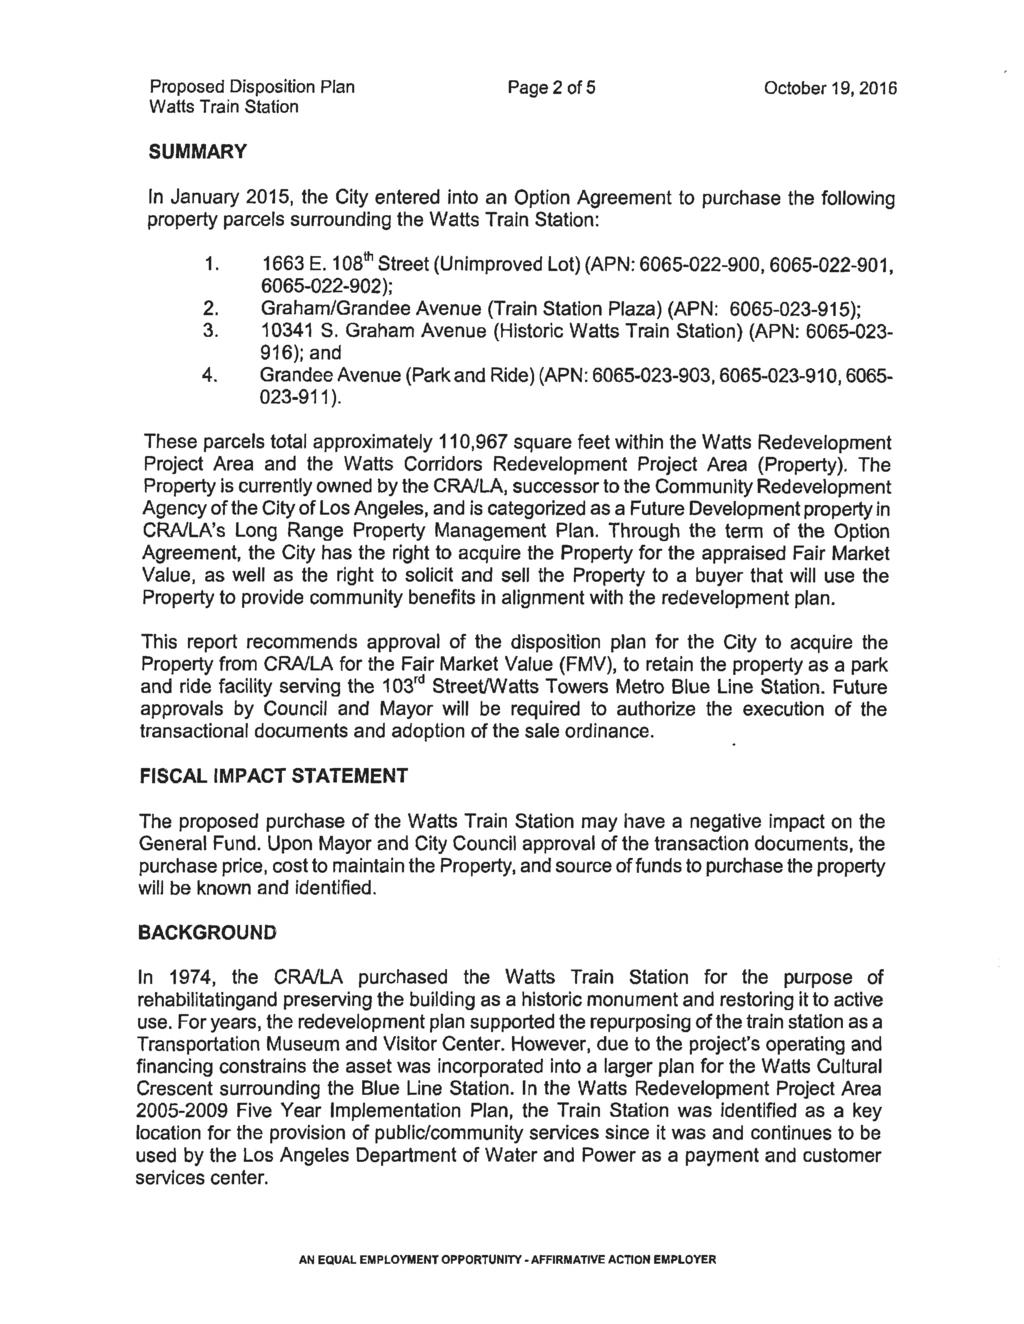 Proposed Disposition Plan Watts Train Station Page 2 of 5 October 19, 2016 SUMMARY In January 2015, the City entered into an Option Agreement to purchase the following property parcels surrounding